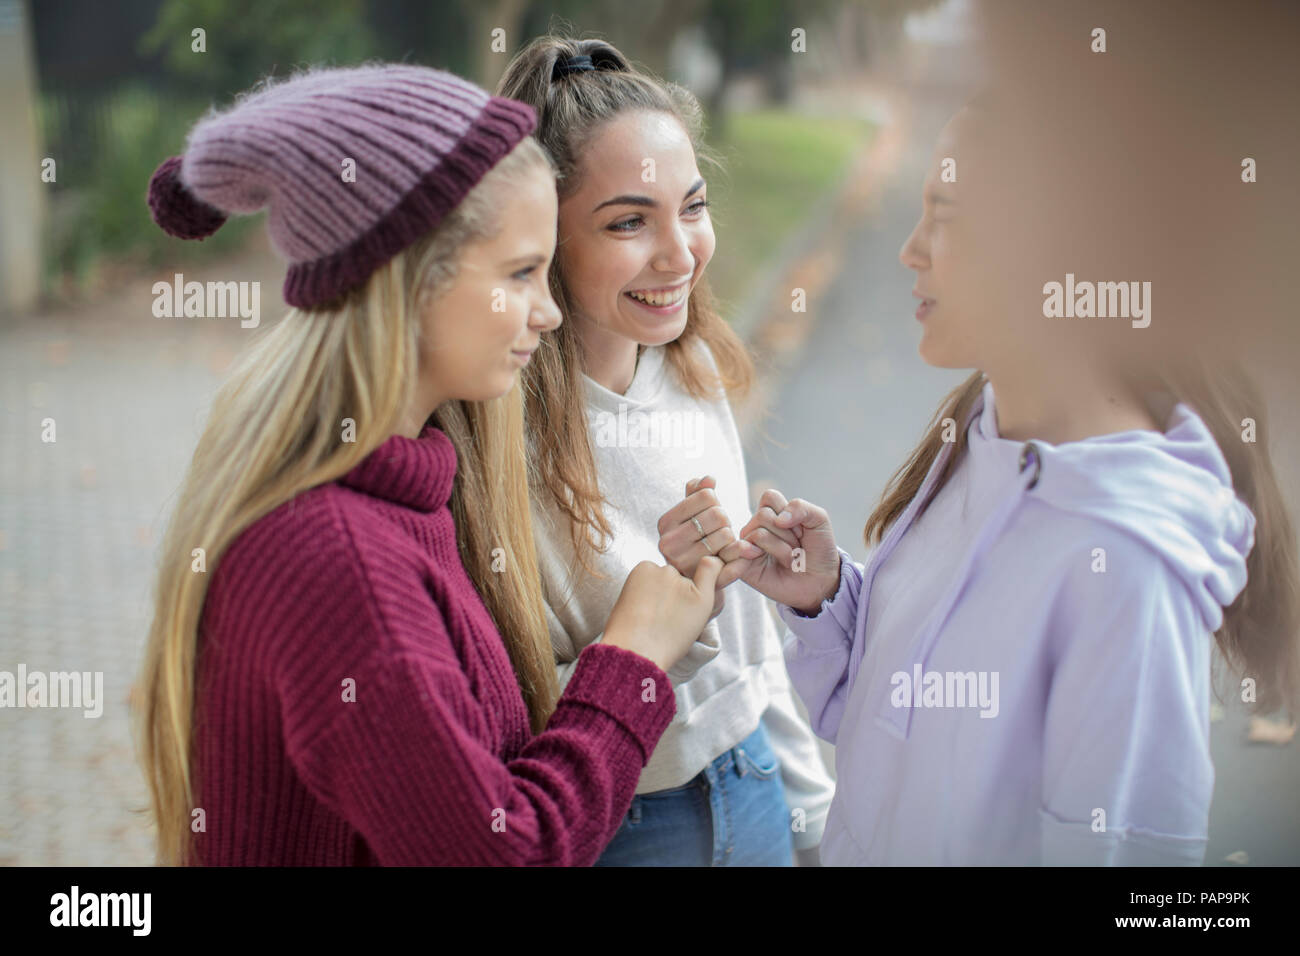 Smiling teenage girls making a pinky promise Stock Photo